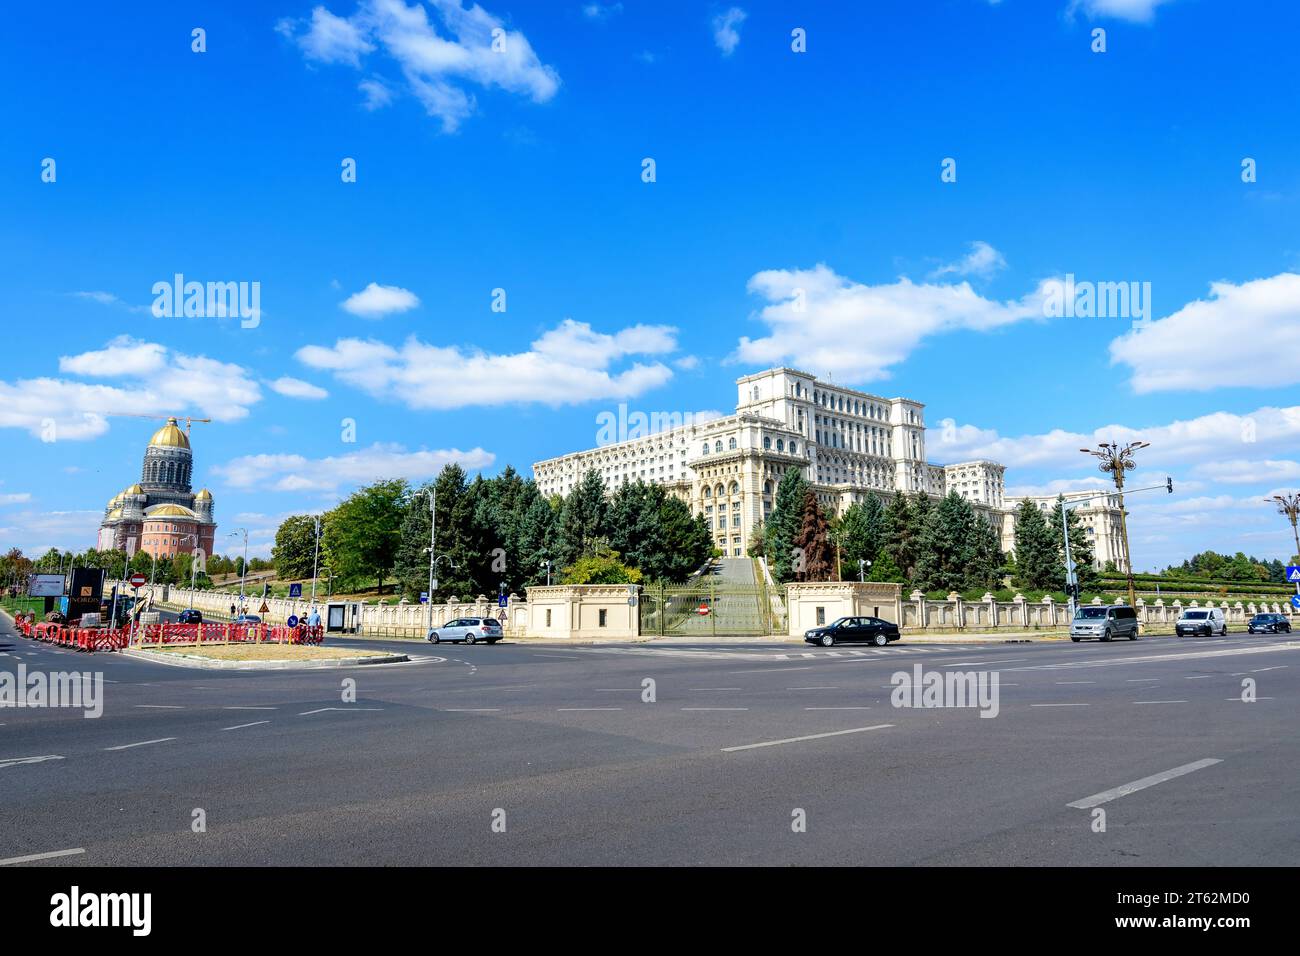 Bucharest, Romania, 2 October 2021: The Palace of the Parliament also known as People's House (Casa Poporului) in Constitutiei Square (Piata Constitut Stock Photo